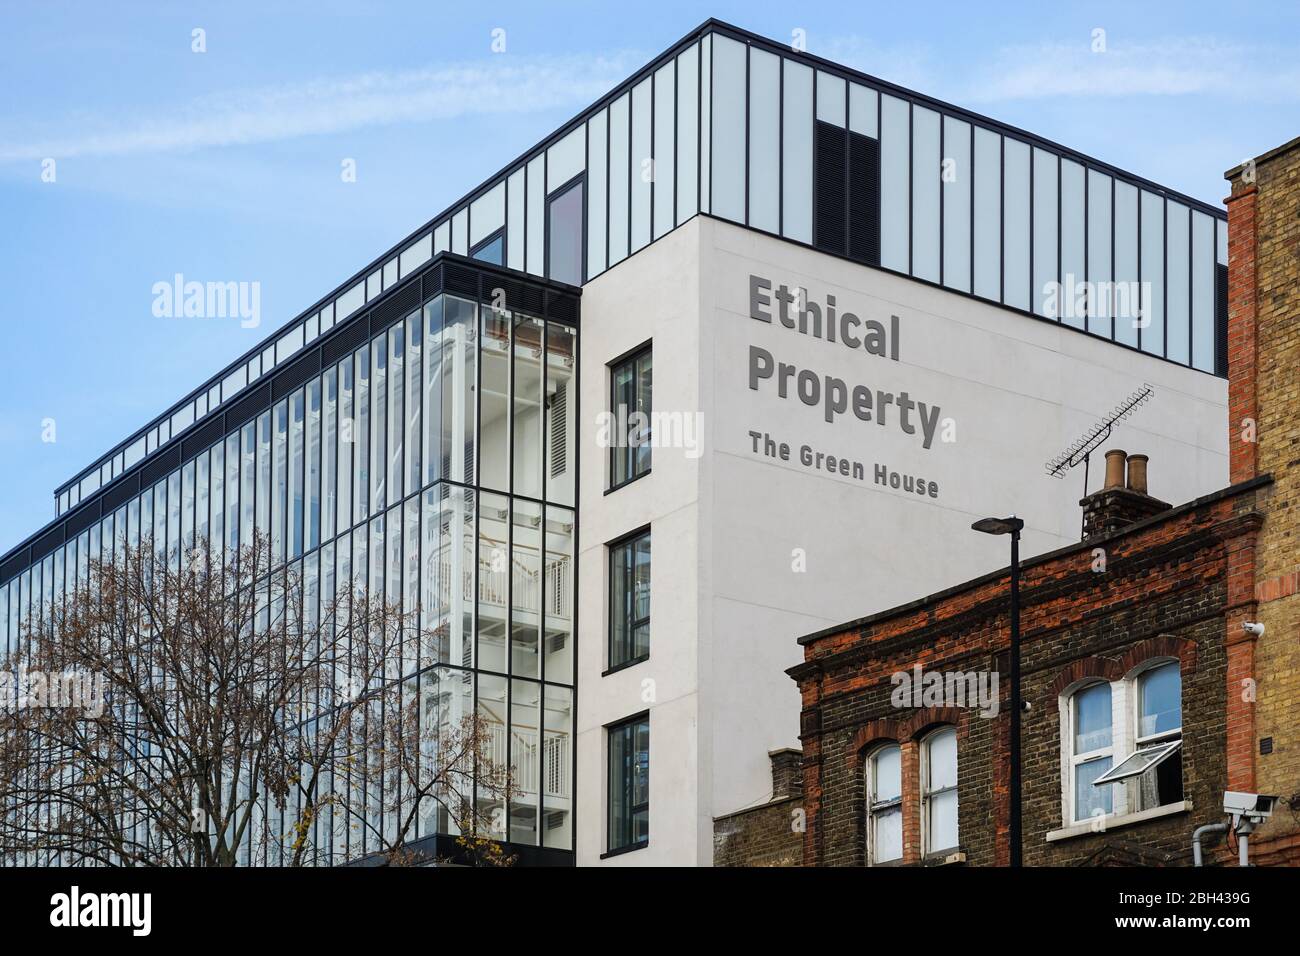 The Green House in Bethnal Green, Ethical Property Company Building, Londra, Inghilterra Regno Unito Foto Stock